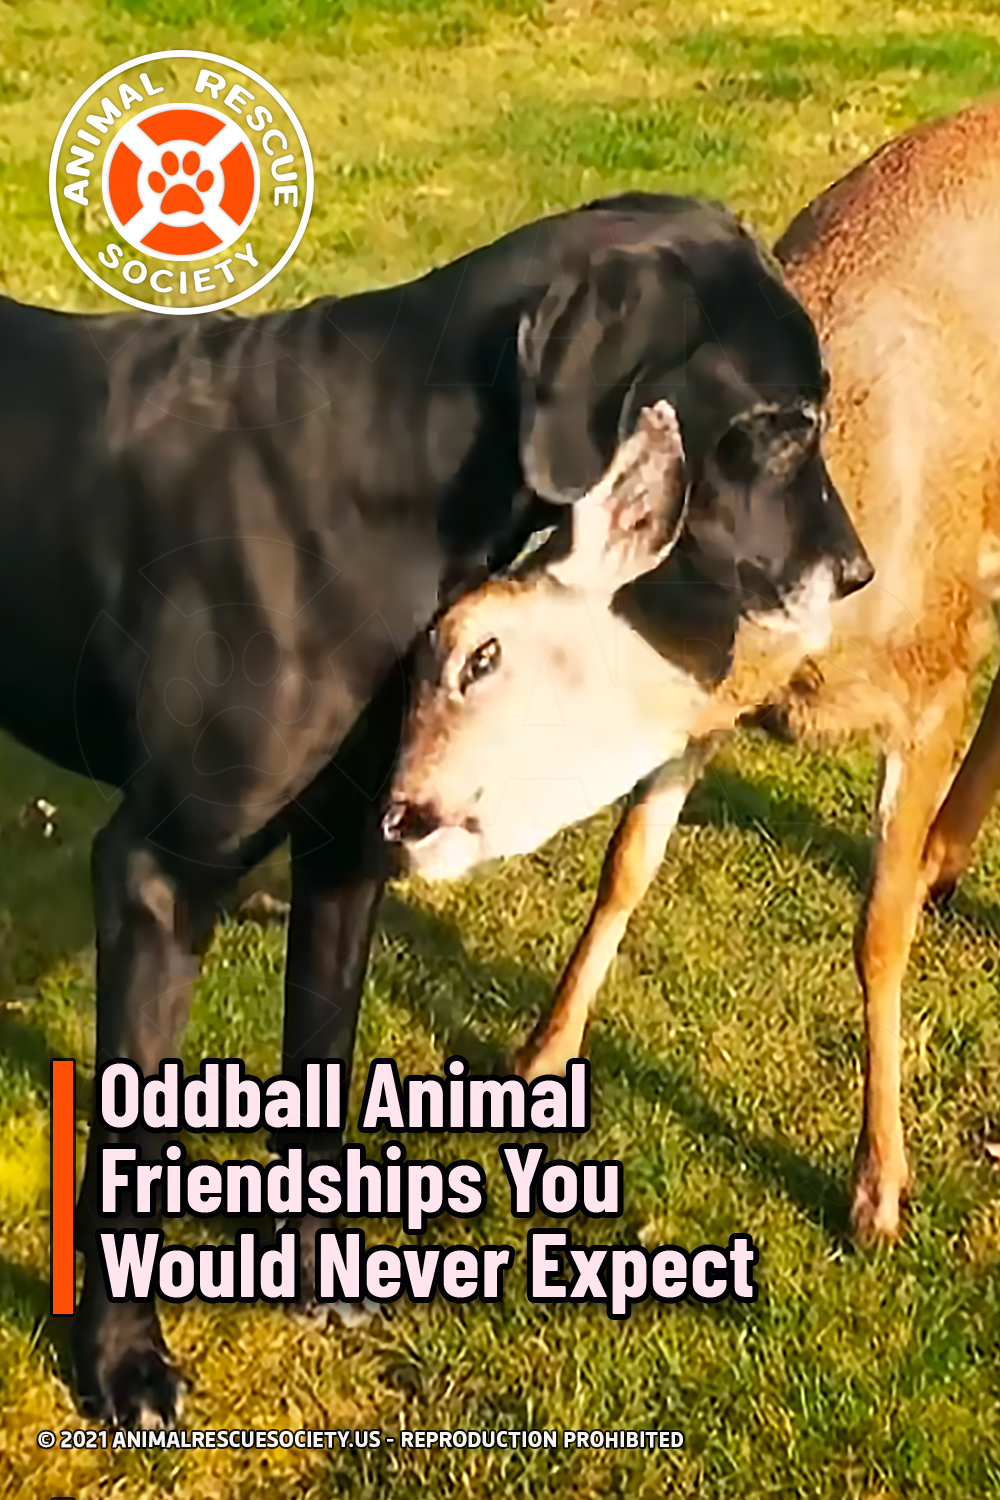 Oddball Animal Friendships You Would Never Expect